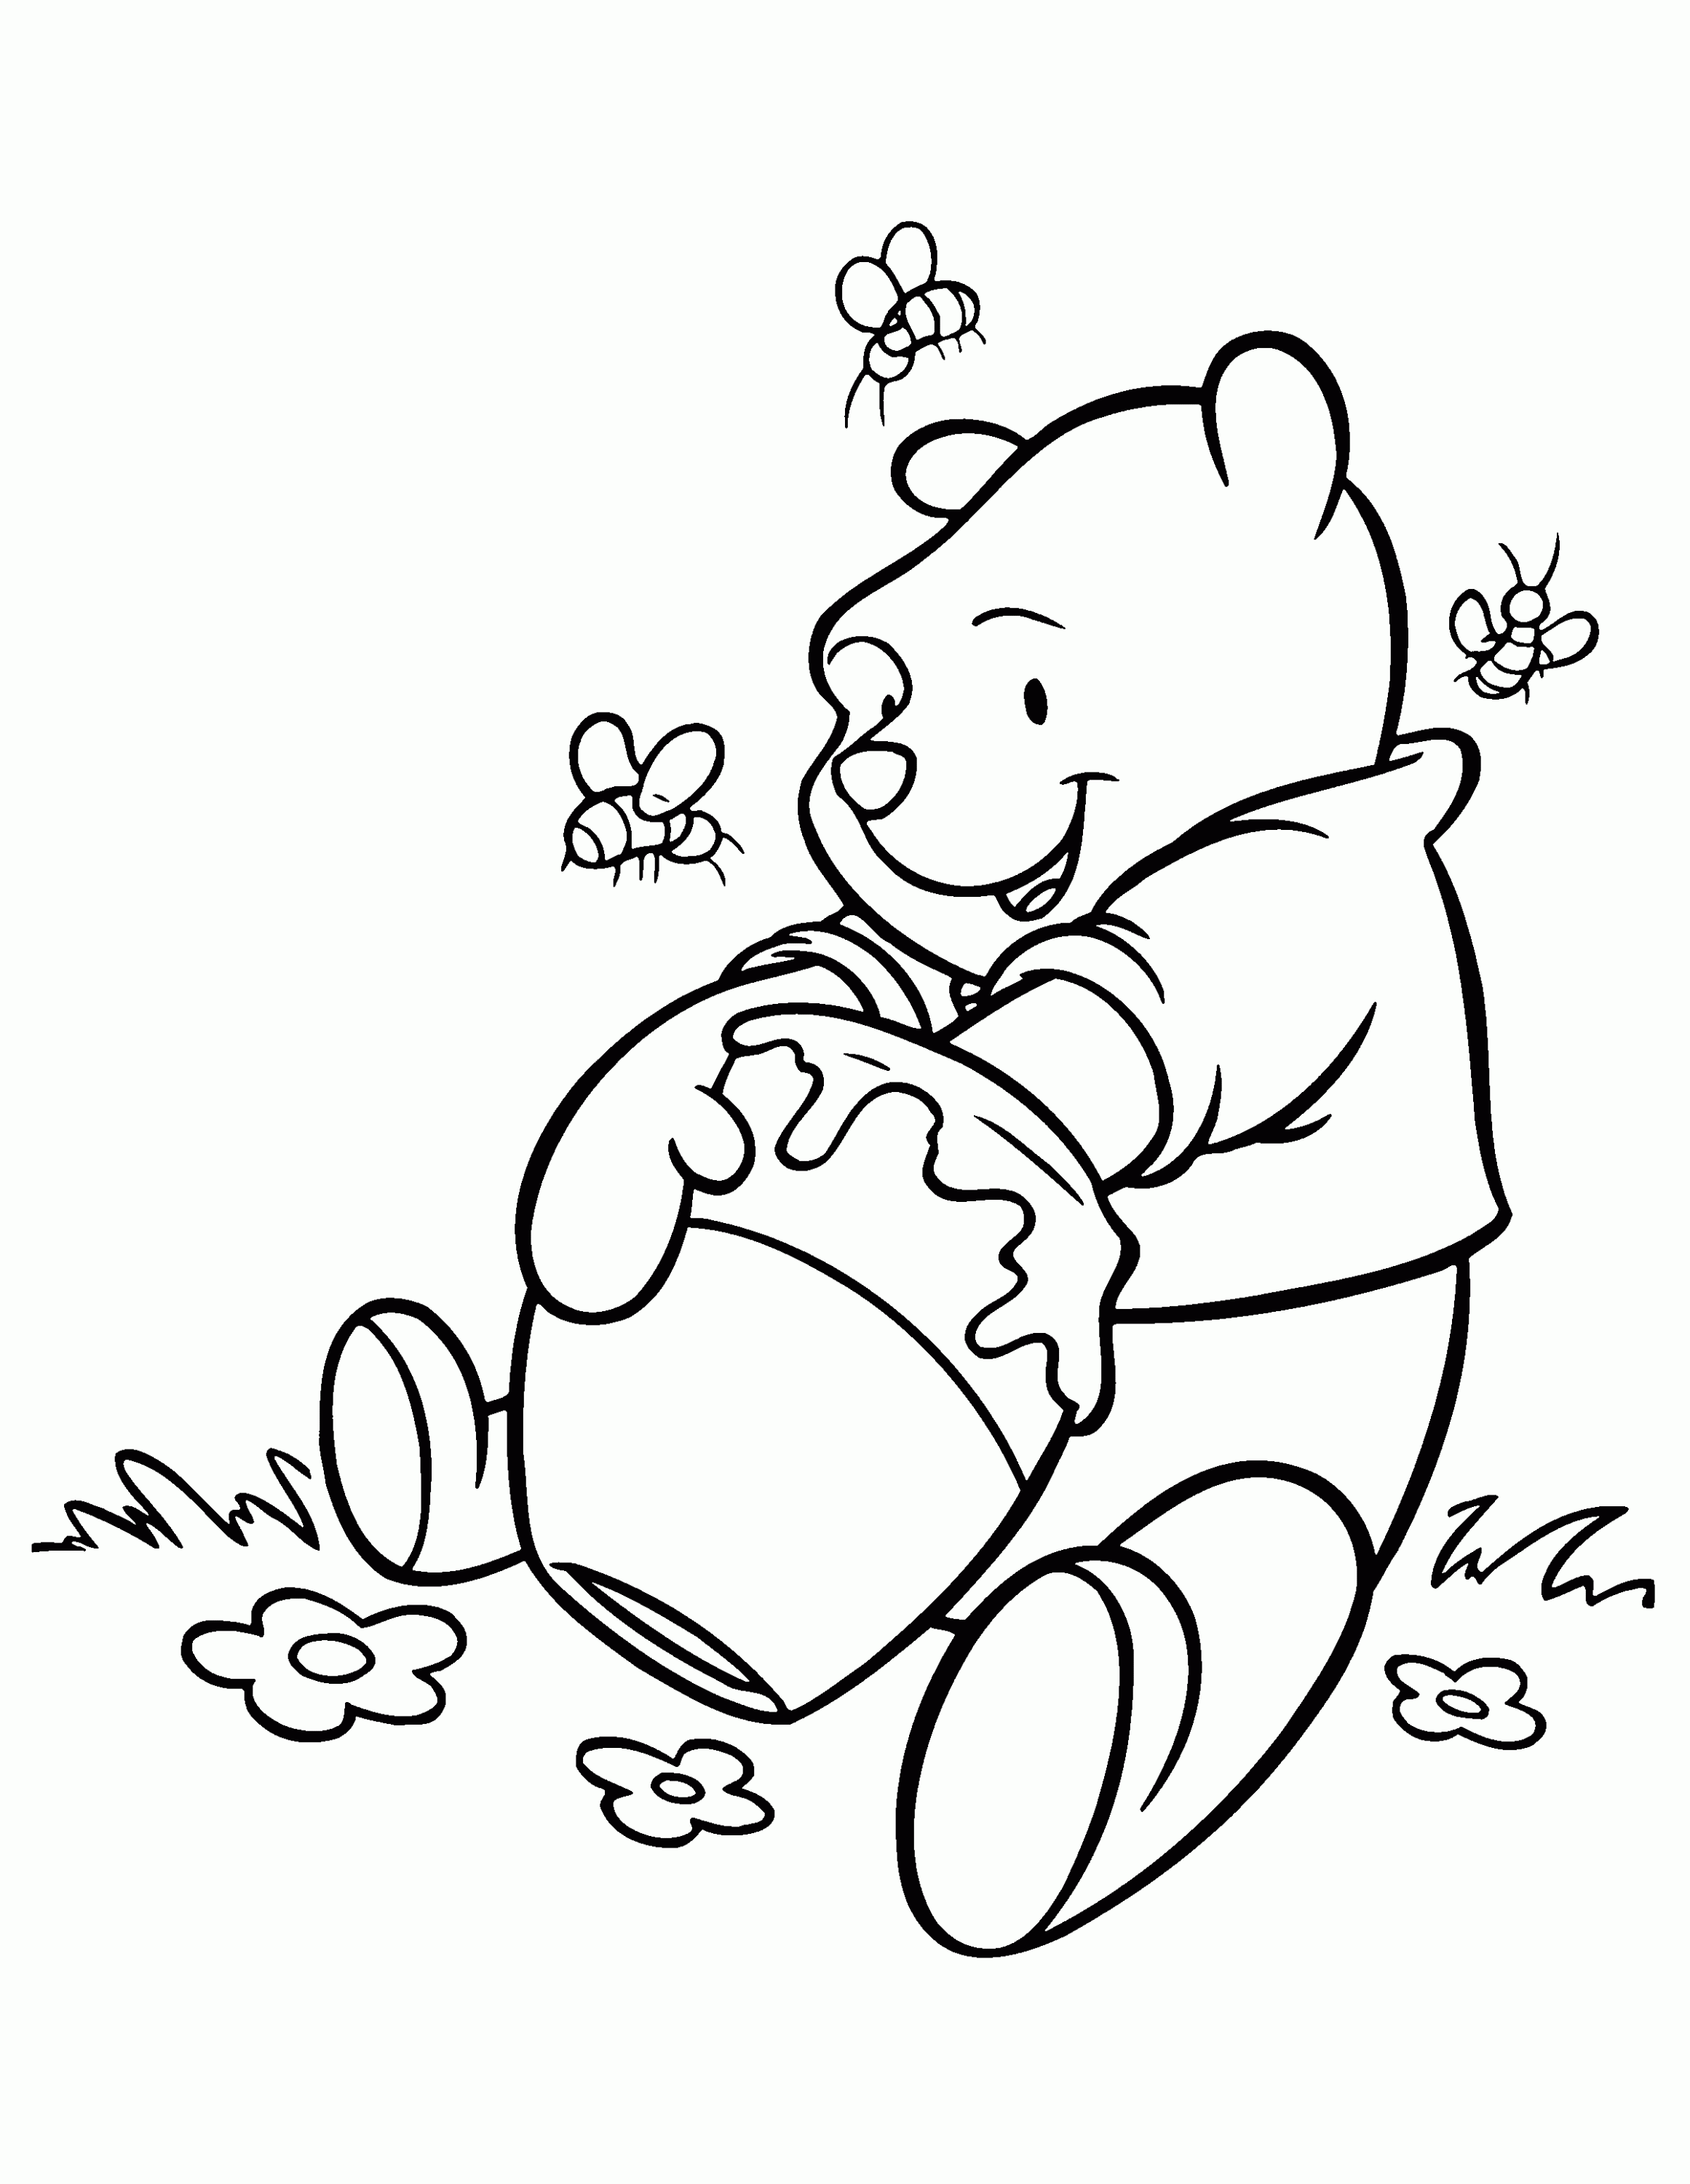 Cartoon Winnie The Pooh Coloring Pages: Disney Thanksgiving ...